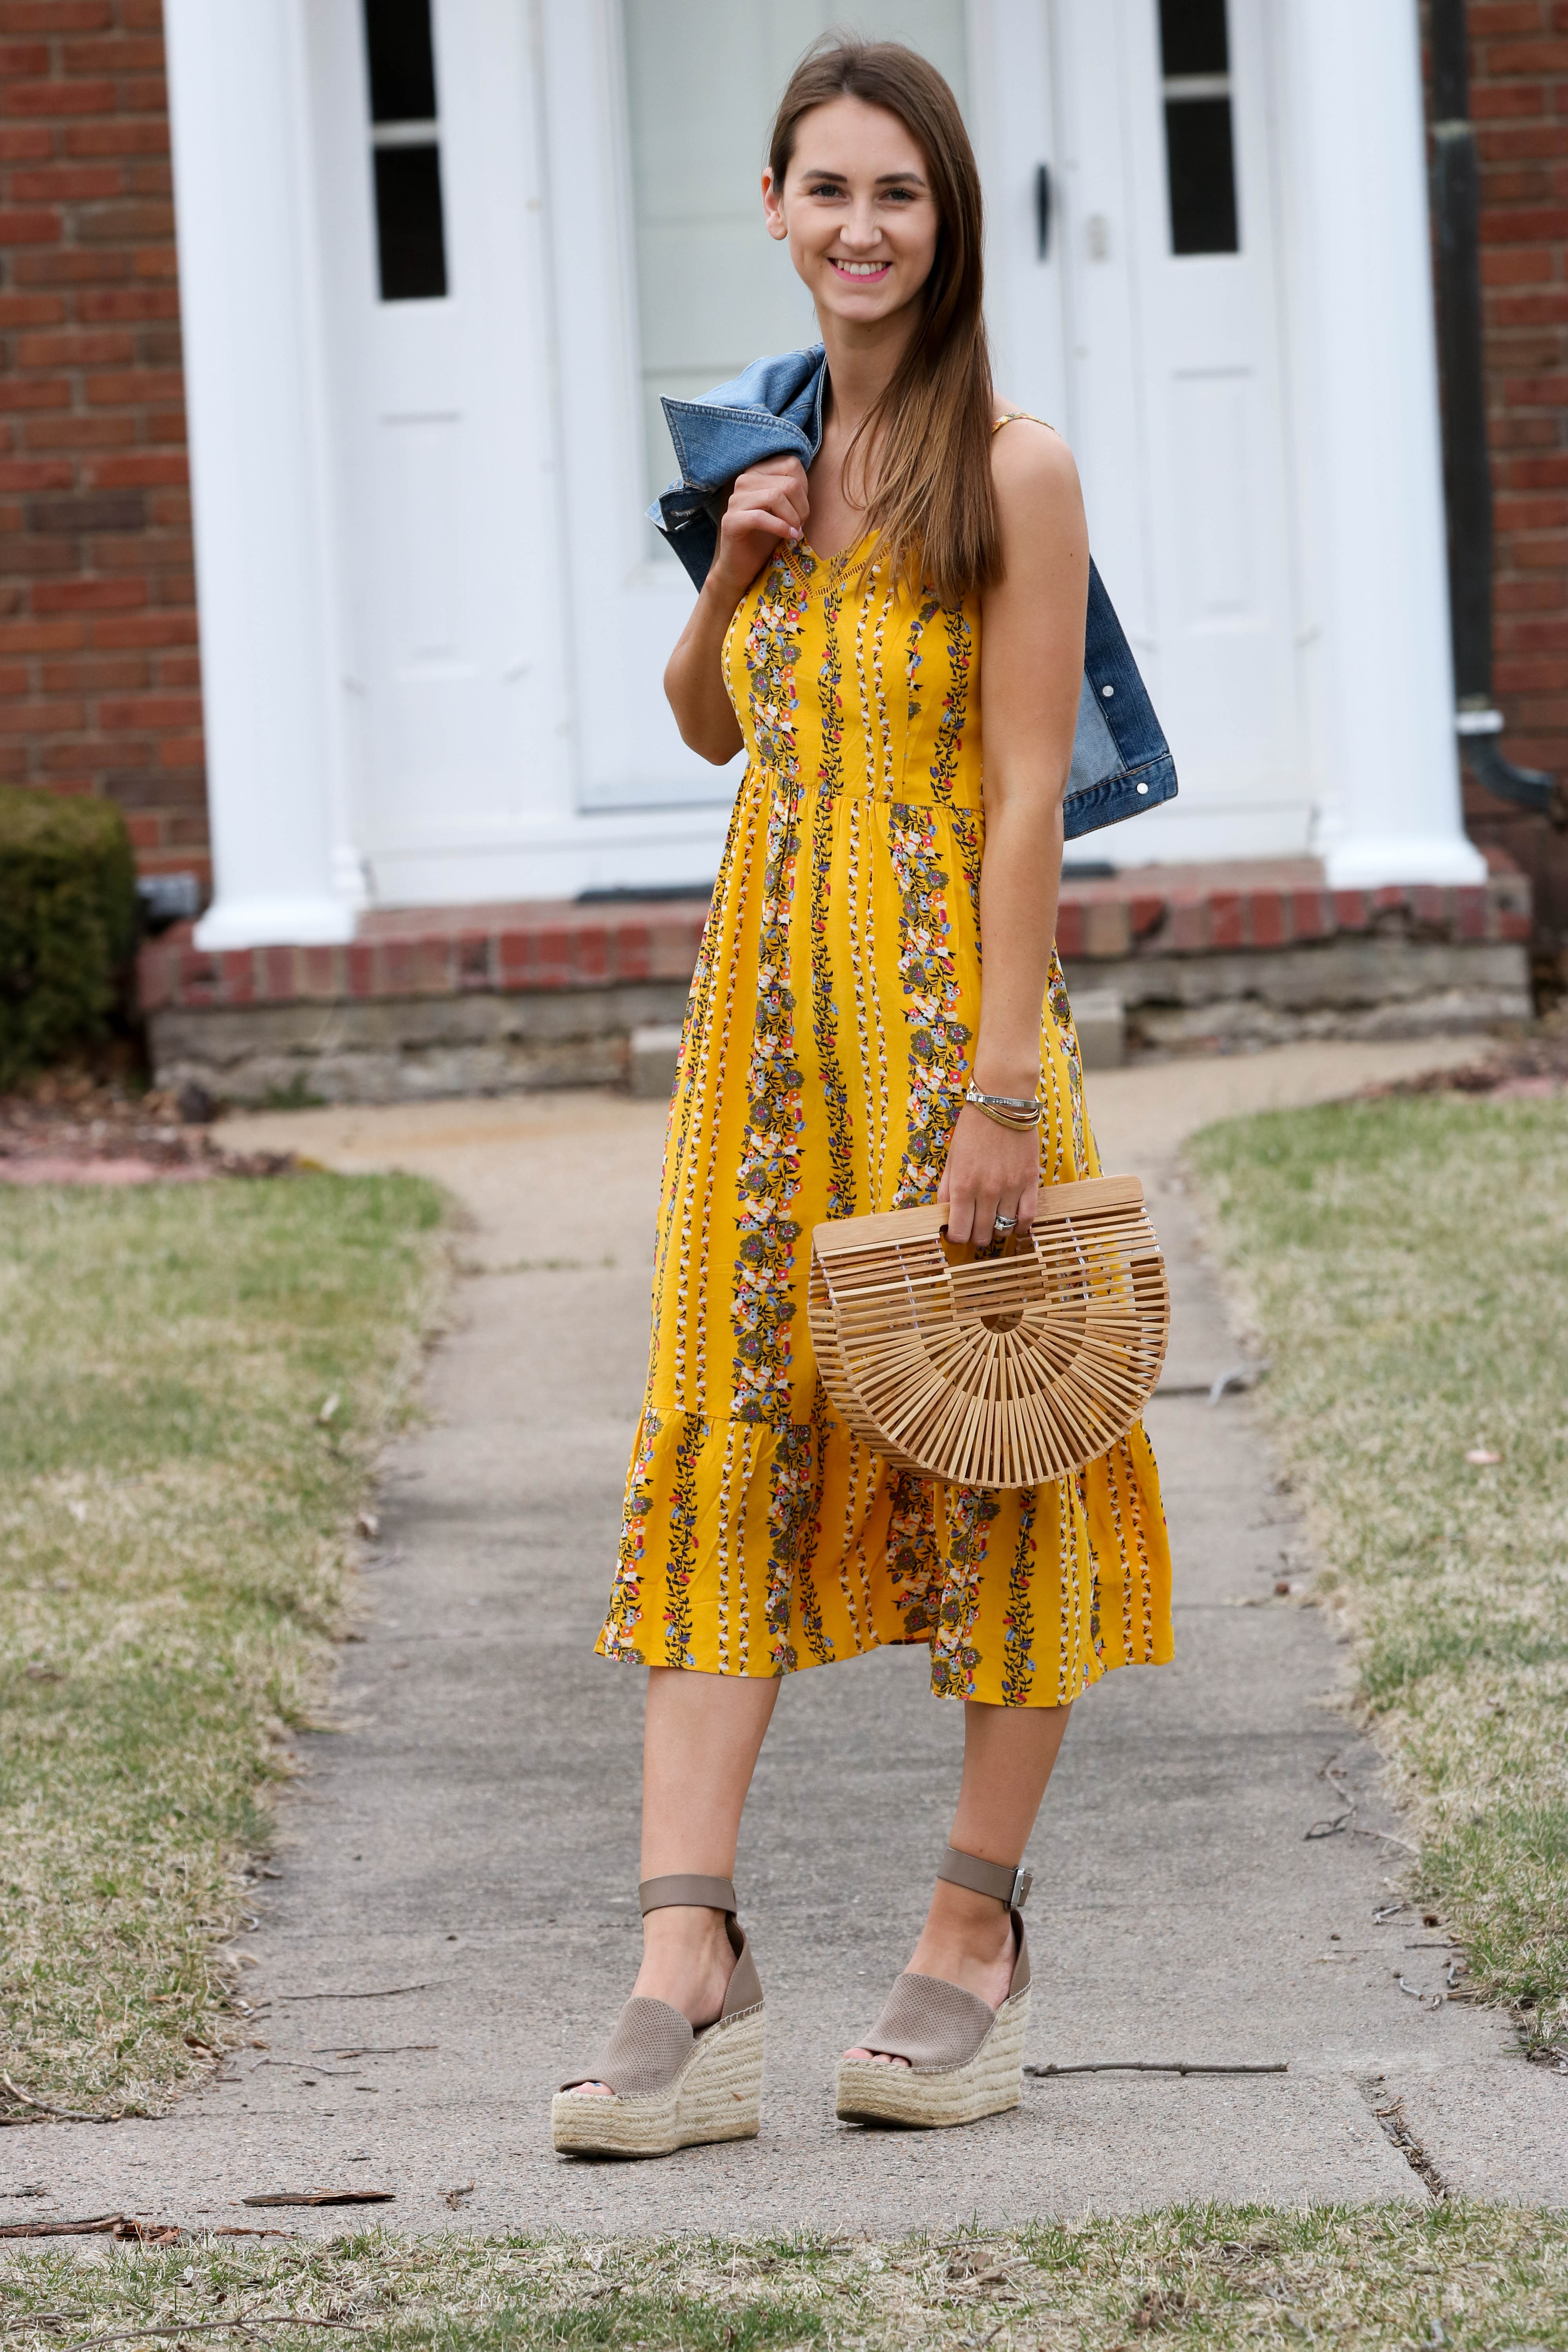 yellow floral dress old navy